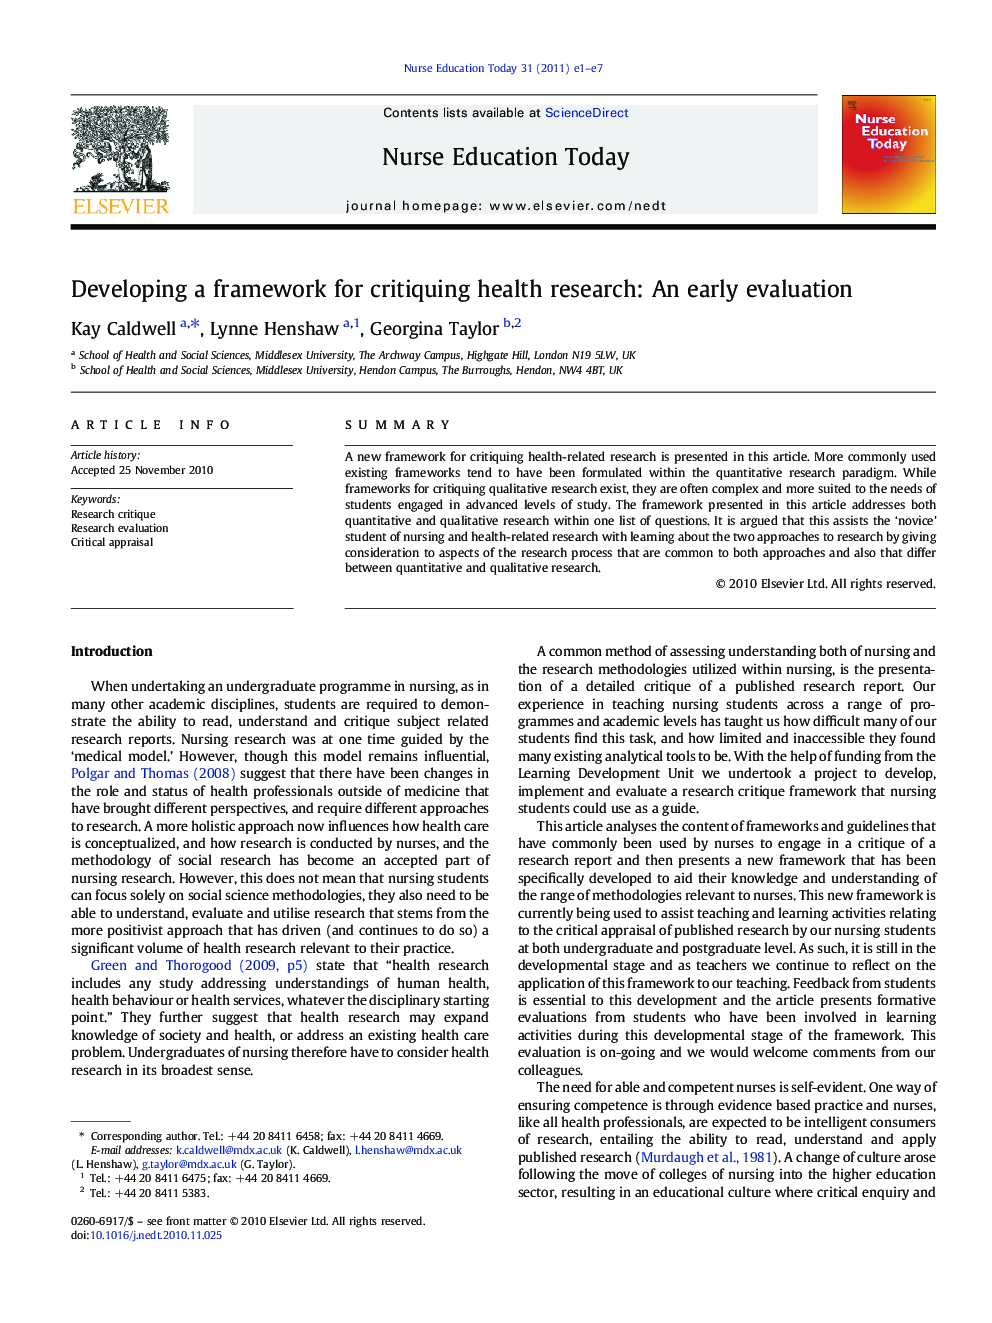 Developing a framework for critiquing health research: An early evaluation